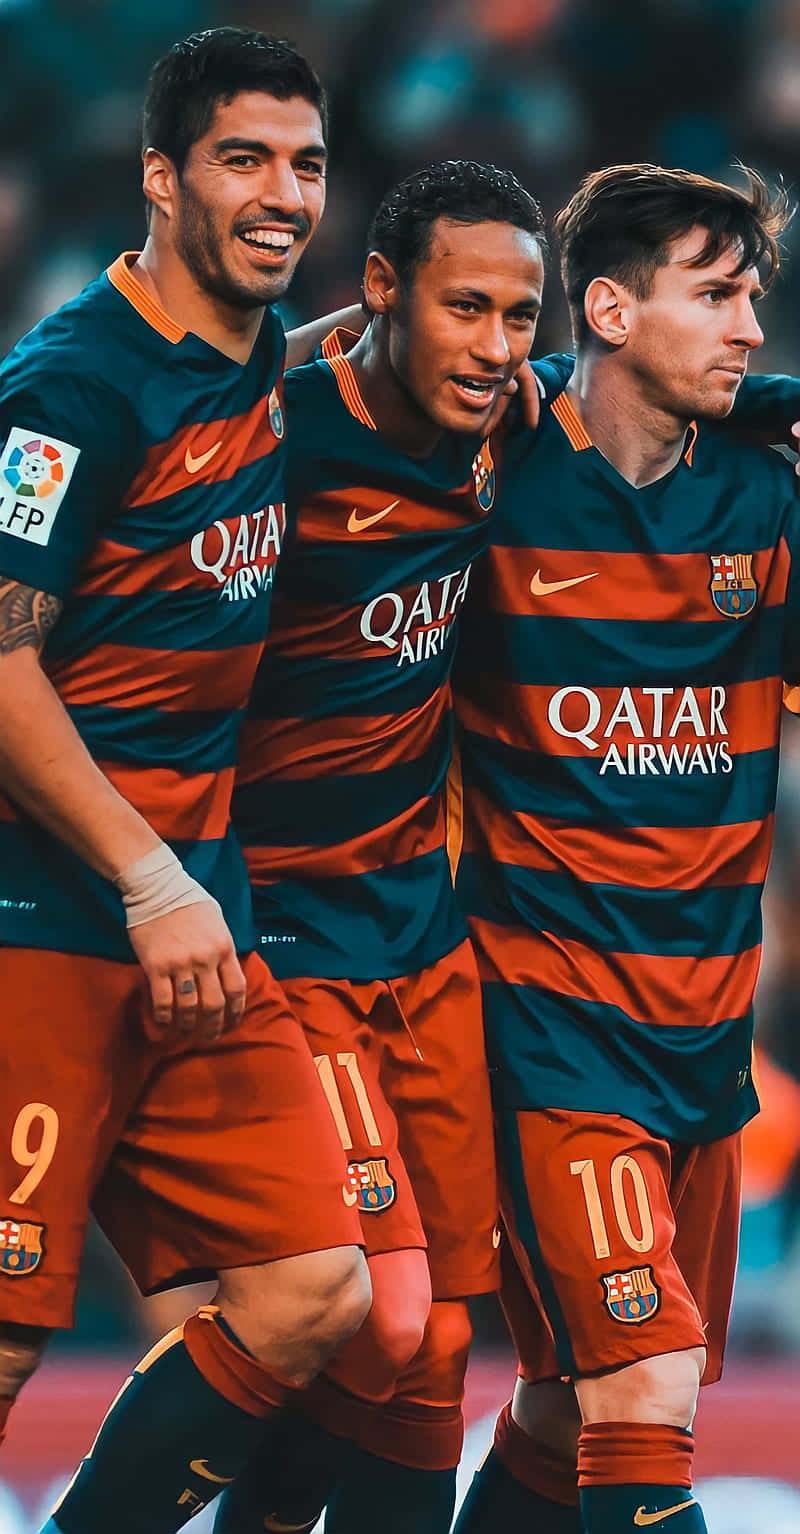 Soccer greats Lionel Messi and Neymar Jr. making history Wallpaper